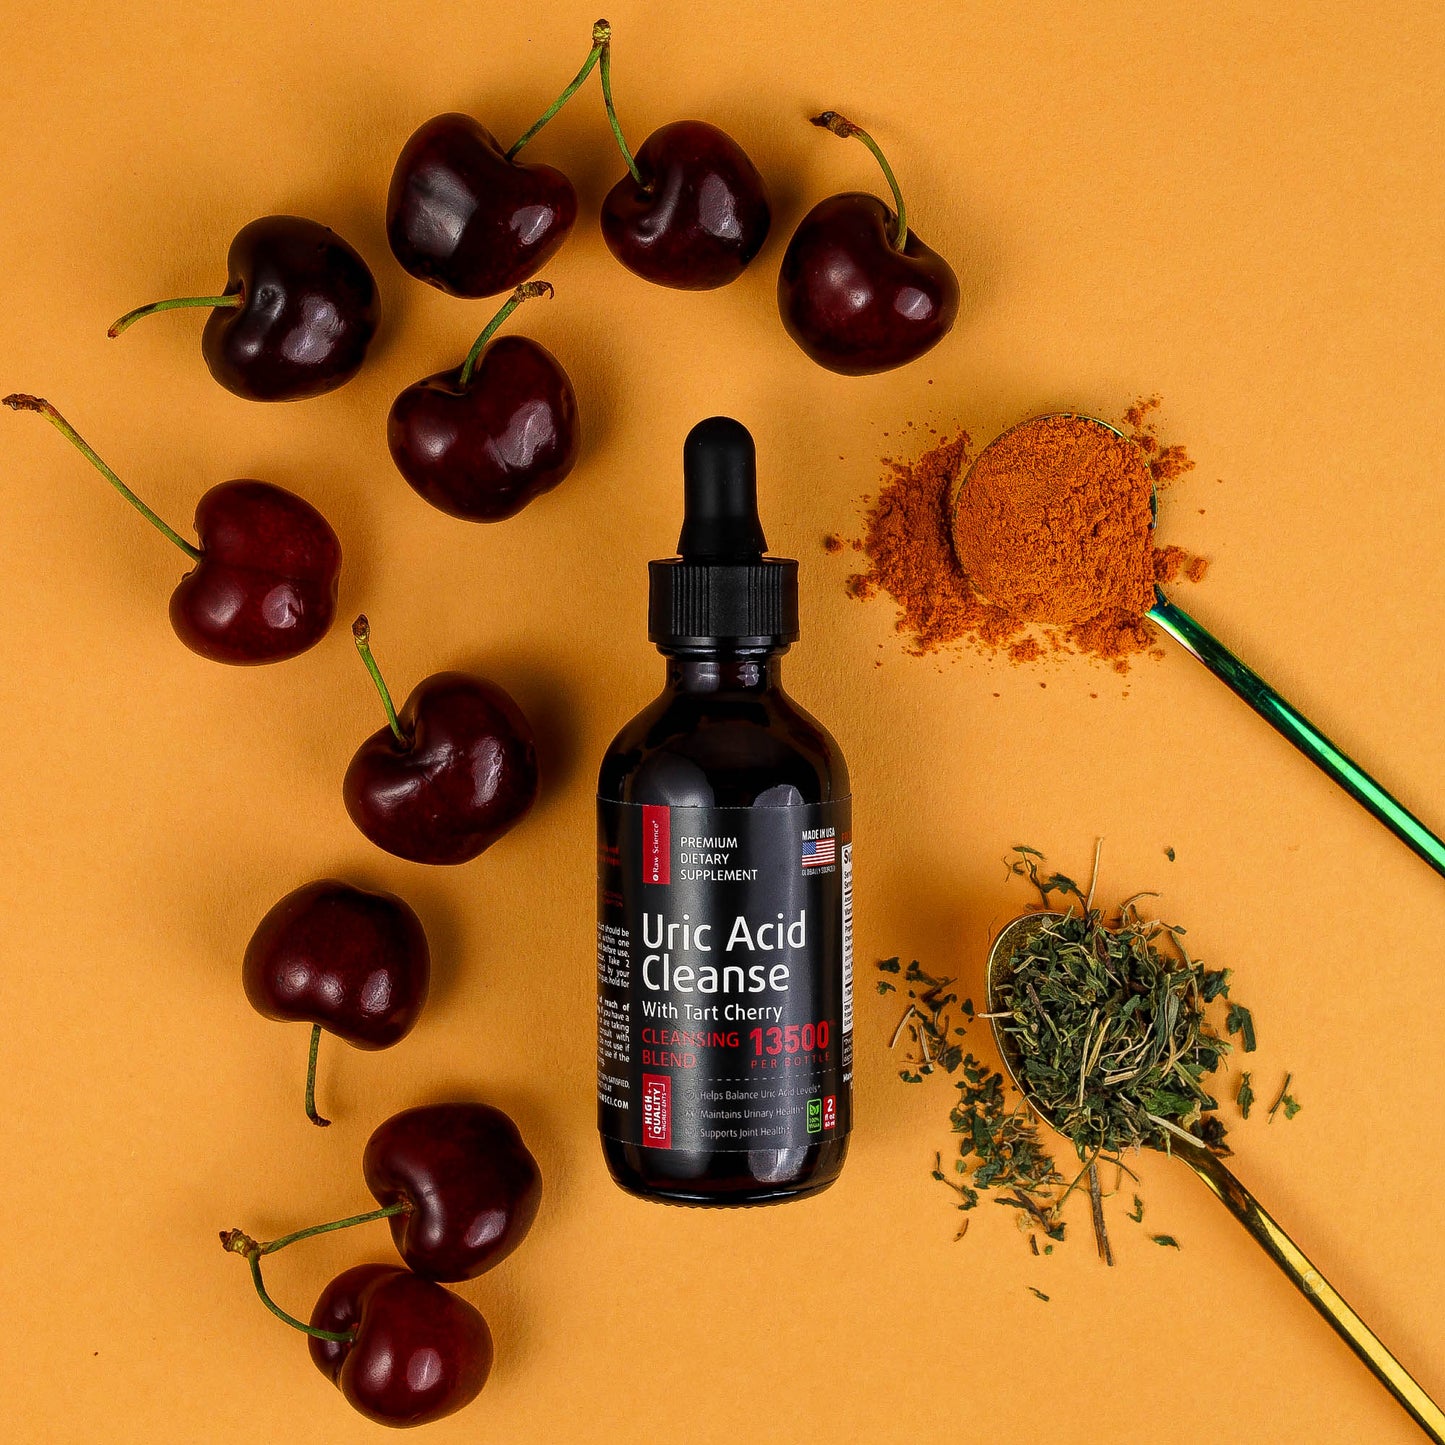 Uric Acid Cleanse with Tart Cherry